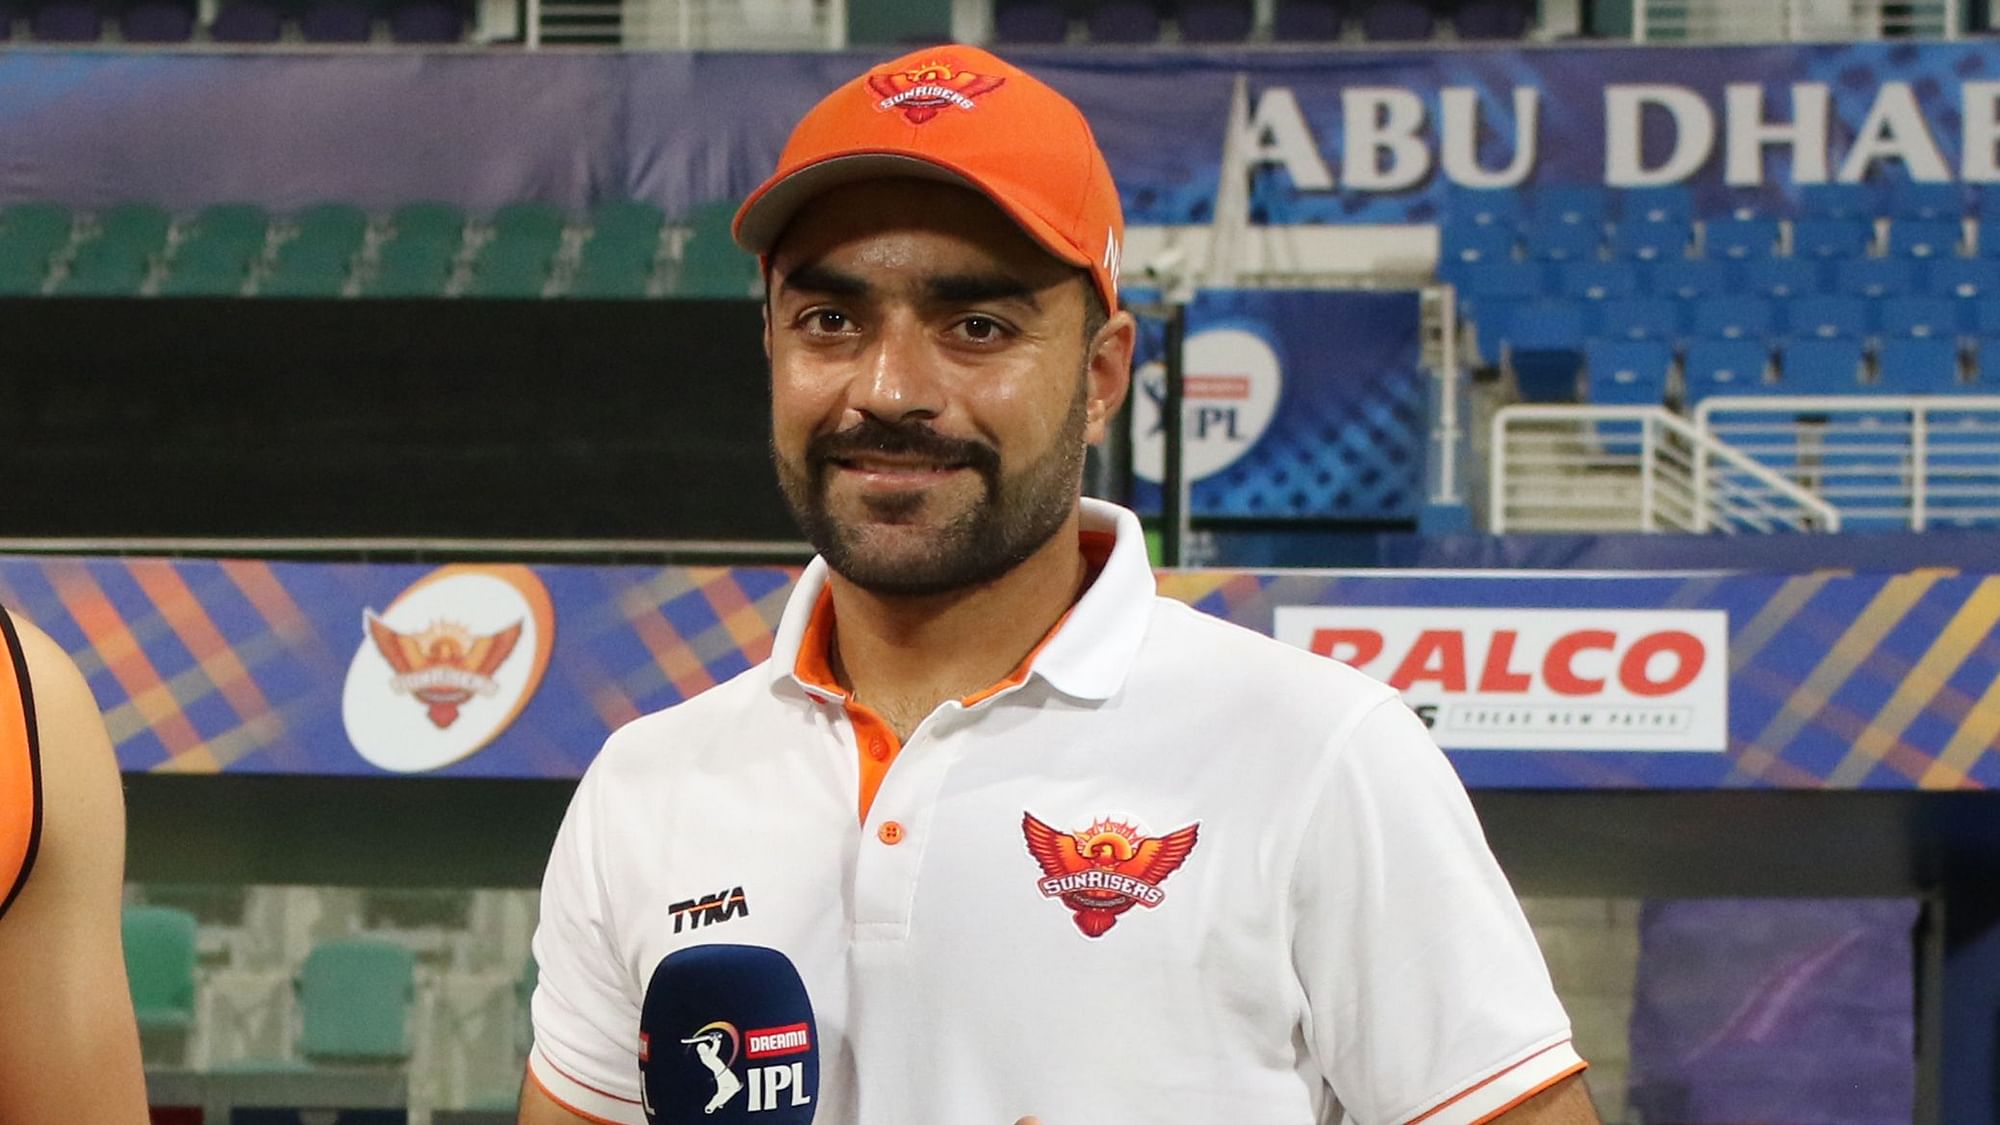 Rashid Khan picked 3 wickets conceding just 14 runs in the match against Delhi Capitals.